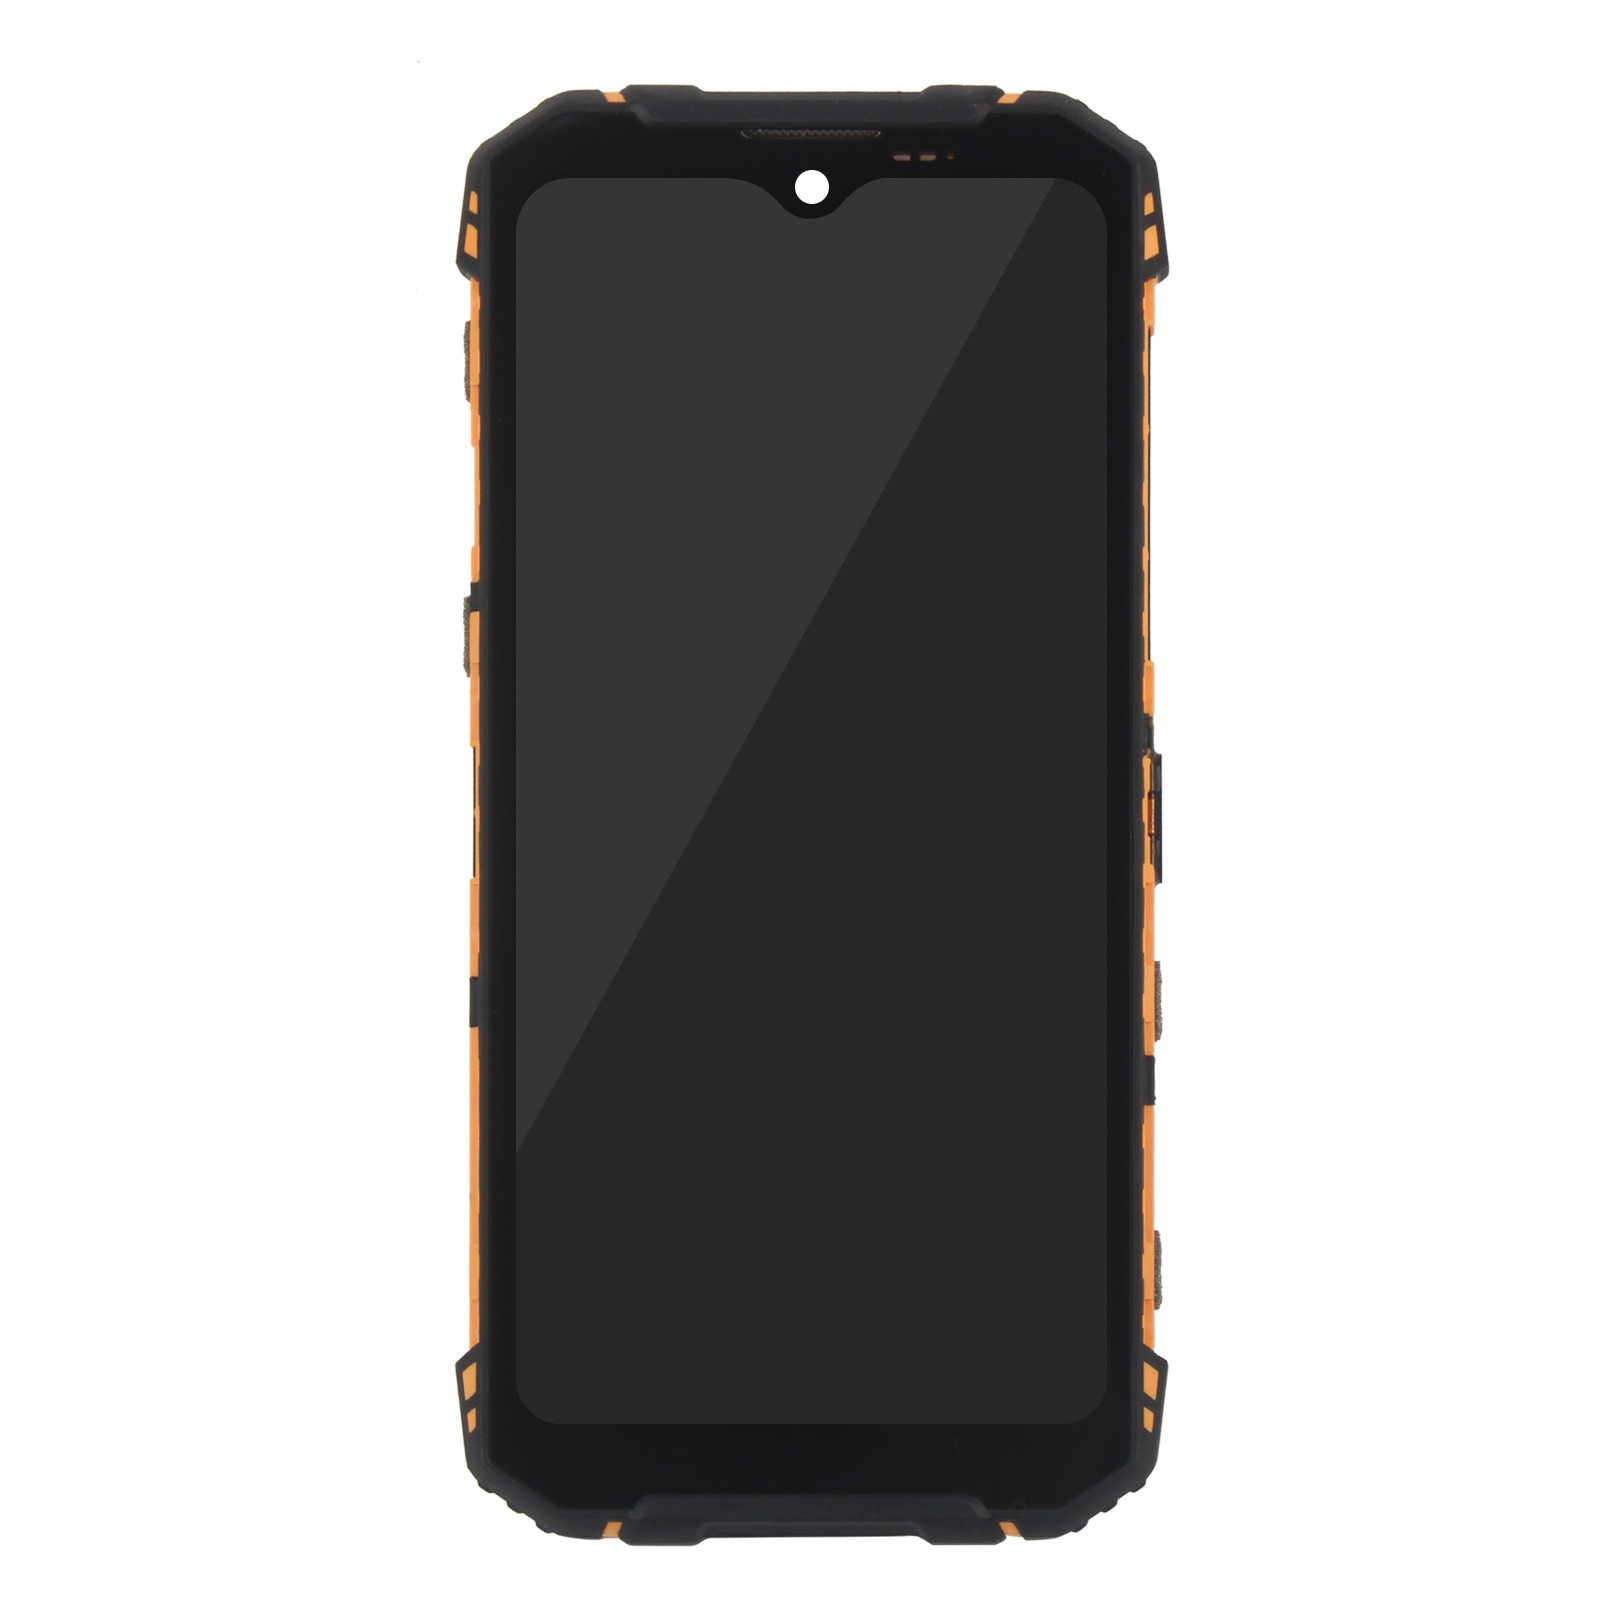 DOOGEE-Original-for-Doogee-S96-Pro-LCD-Display--Touch-Screen-Digitizer-Assembly-Replacement-Parts-wi-1868571-4